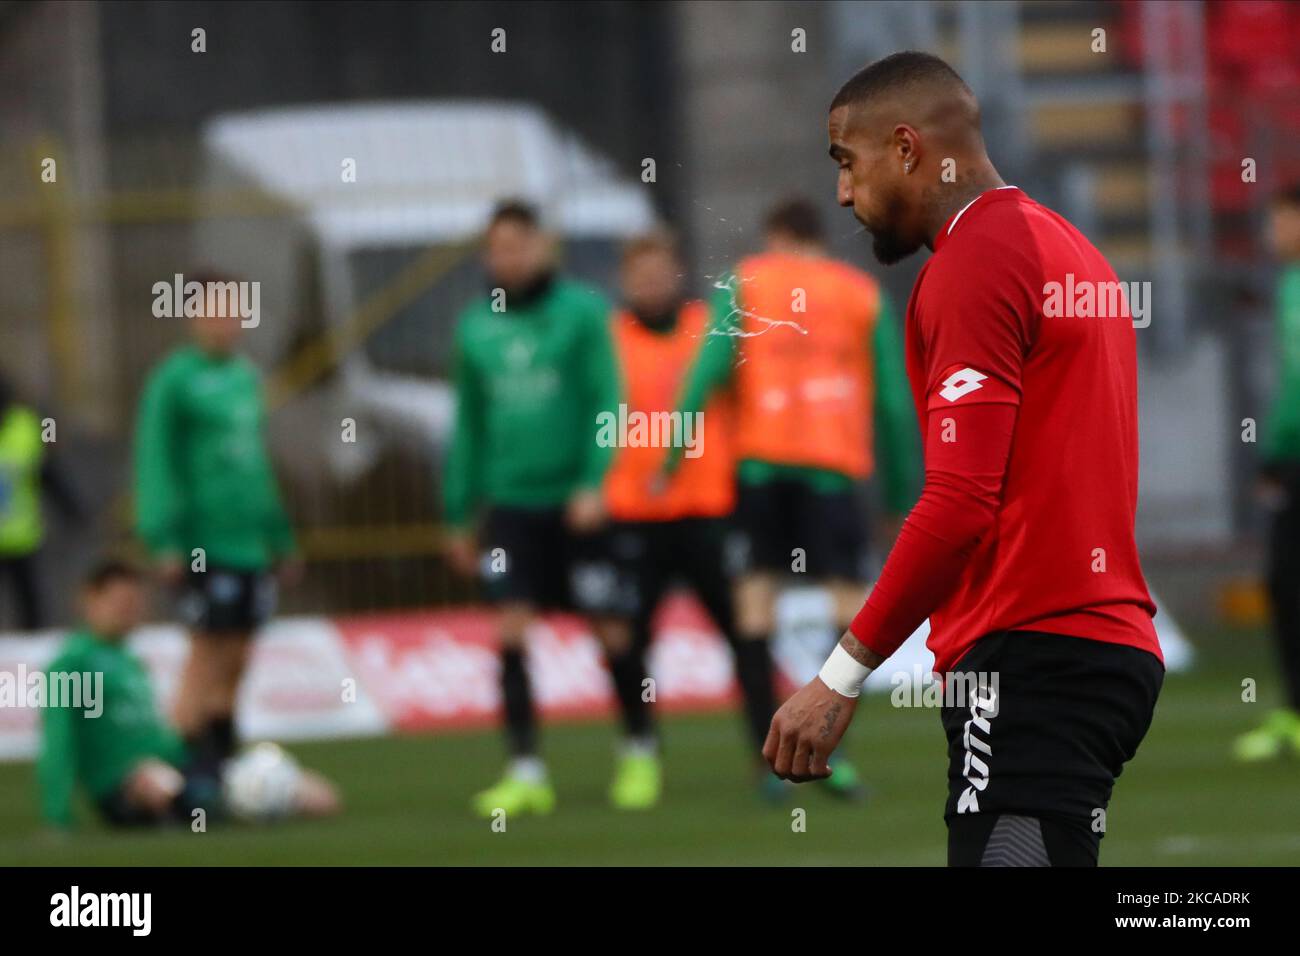 Kevin-Prince Boateng of AC Monza in action during the Serie B match between AC Monza and Pordenone Calcio at Stadio Brianteo on March 06, 2021 in Monza, Italy. (Photo by Mairo Cinquetti/NurPhoto) Stock Photo